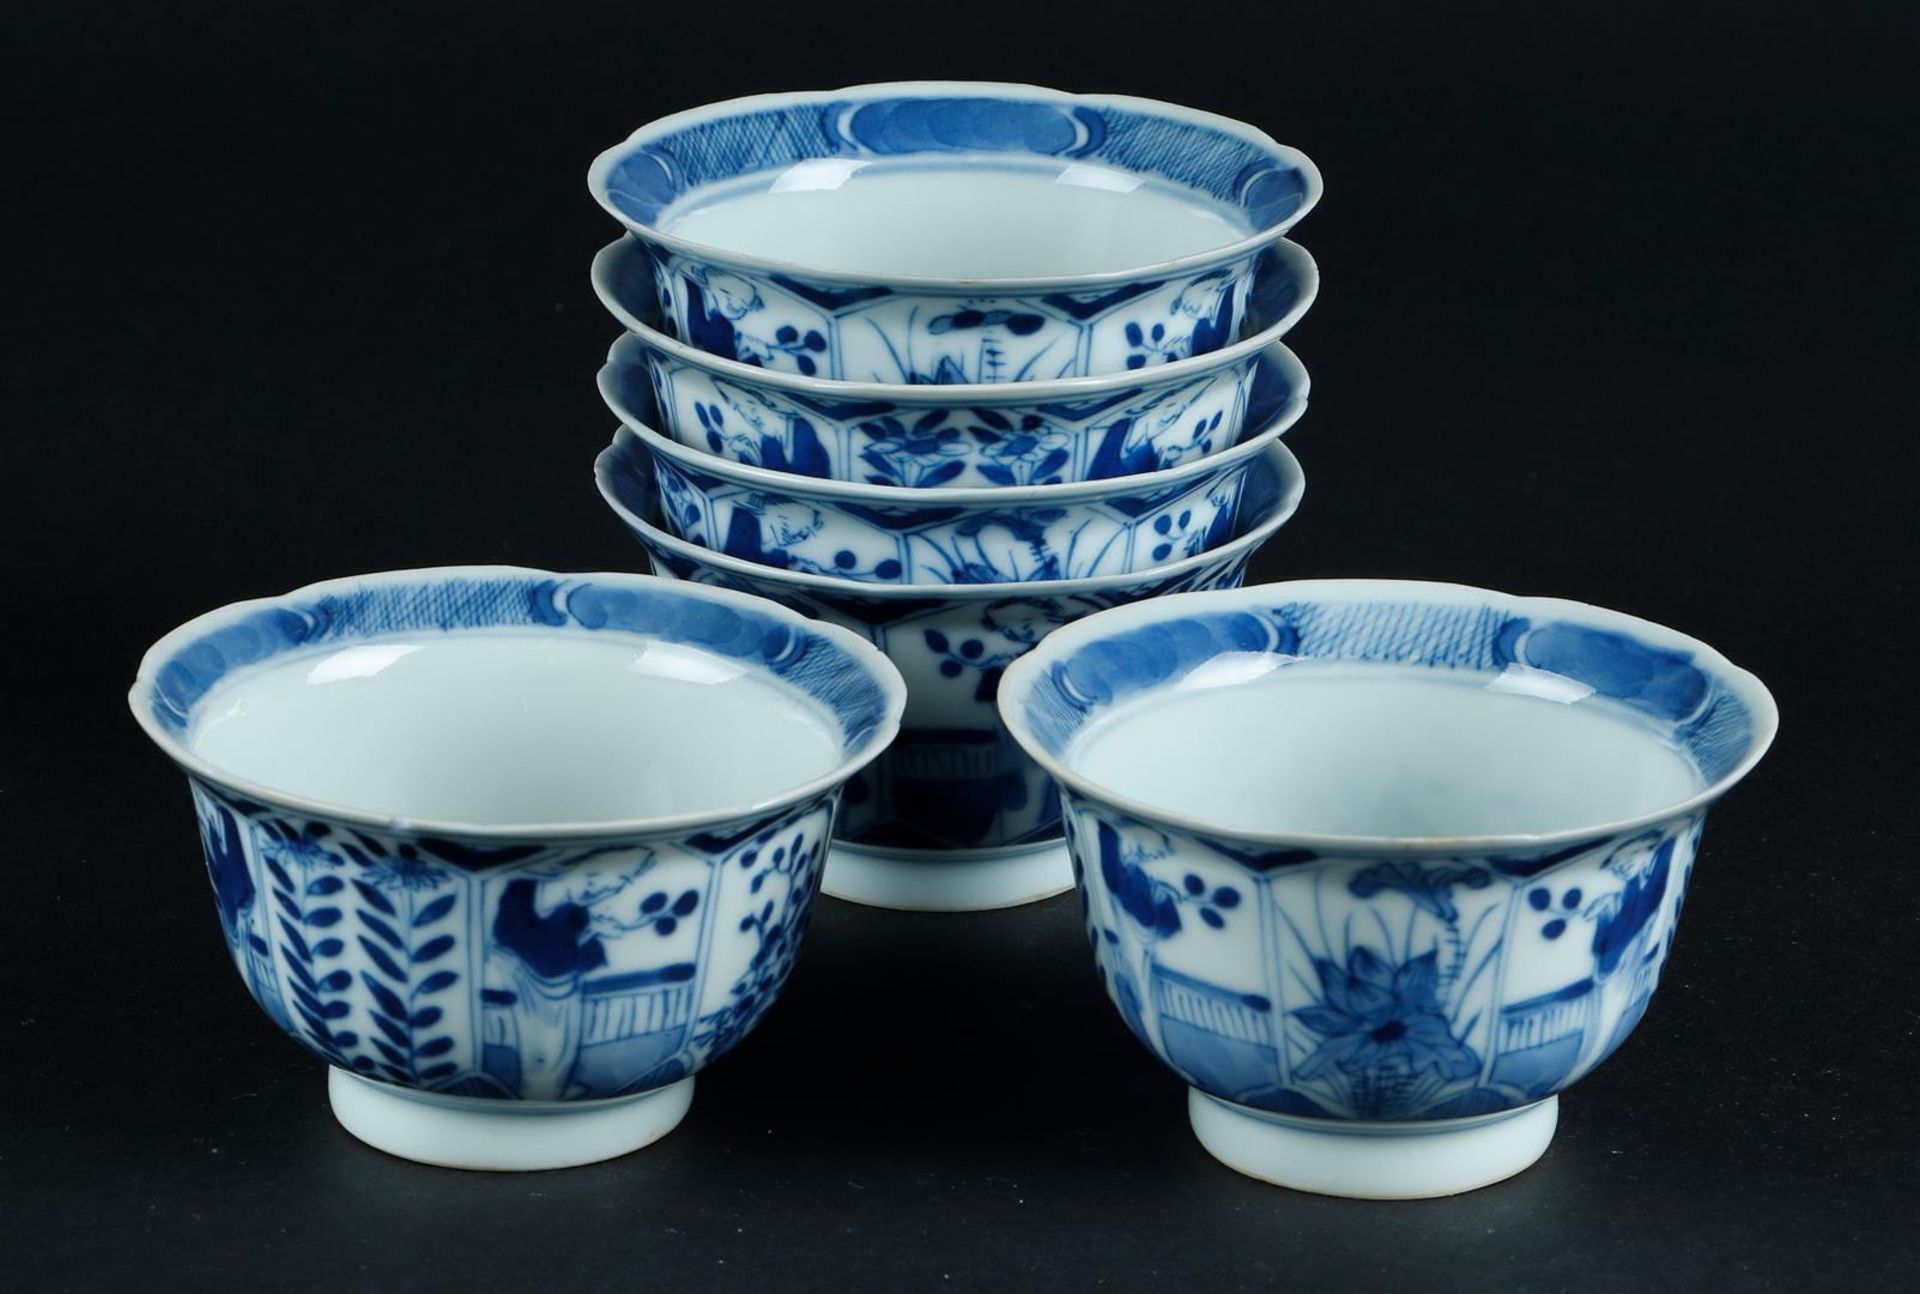 6x porcelain cups, molding decor. China, 19th century. And a beaker vase with lilac decor. China, 19